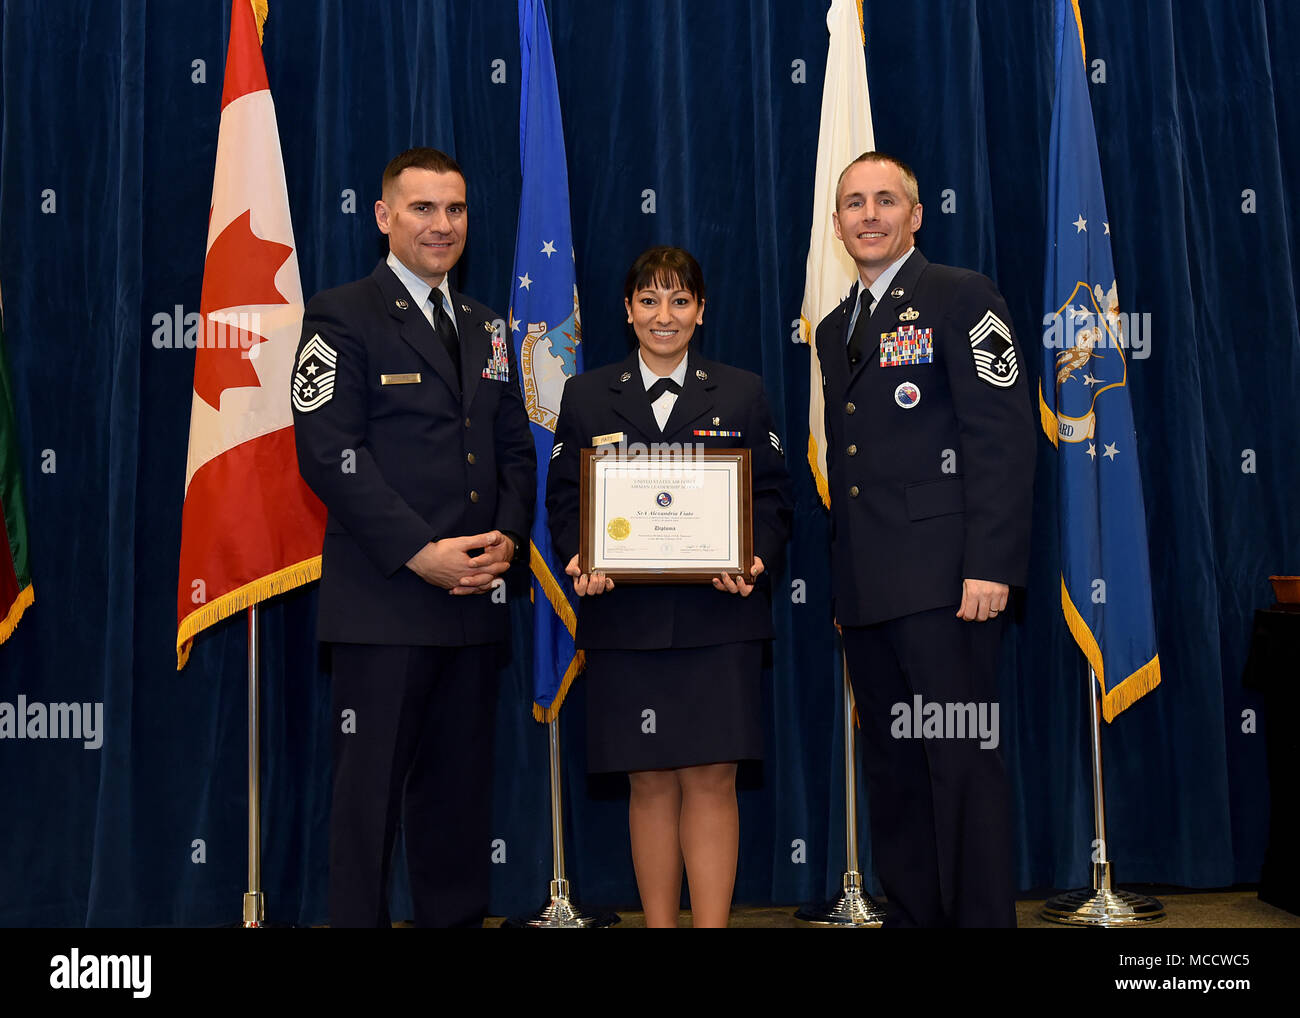 Senior Airman Alexandria Fiato from Fort Wayne Air National Guard Station, Ind., takes the Distinguished Graduate Award in Airman Leadership School 18-4 at the Chief Master Sgt. Paul H. Lankford Enlisted Professional Military Education Center on McGhee Tyson Air National Guard Base in East Tennessee, Feb. 8, 2018, during the graduation ceremony. (U.S. Air National Guard photo/Master Sgt. Mike R. Smith) Stock Photo